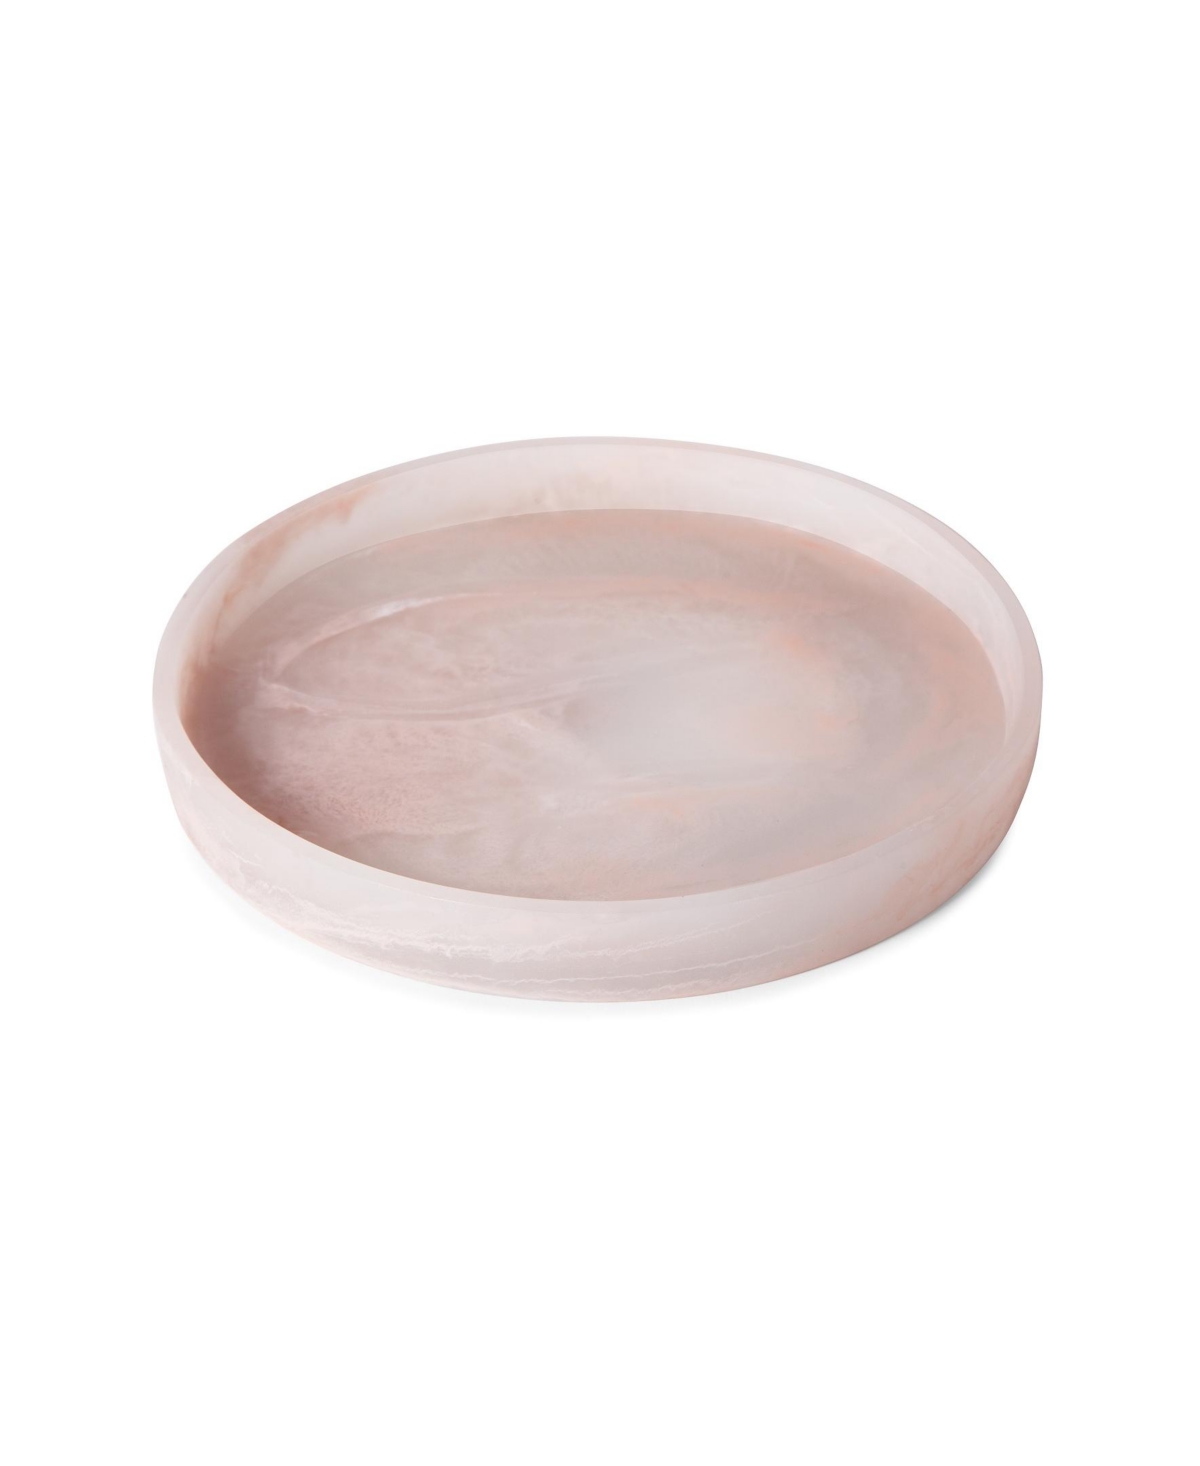 Cassadecor Rose Resin Bathroom Tray In Pale Pink